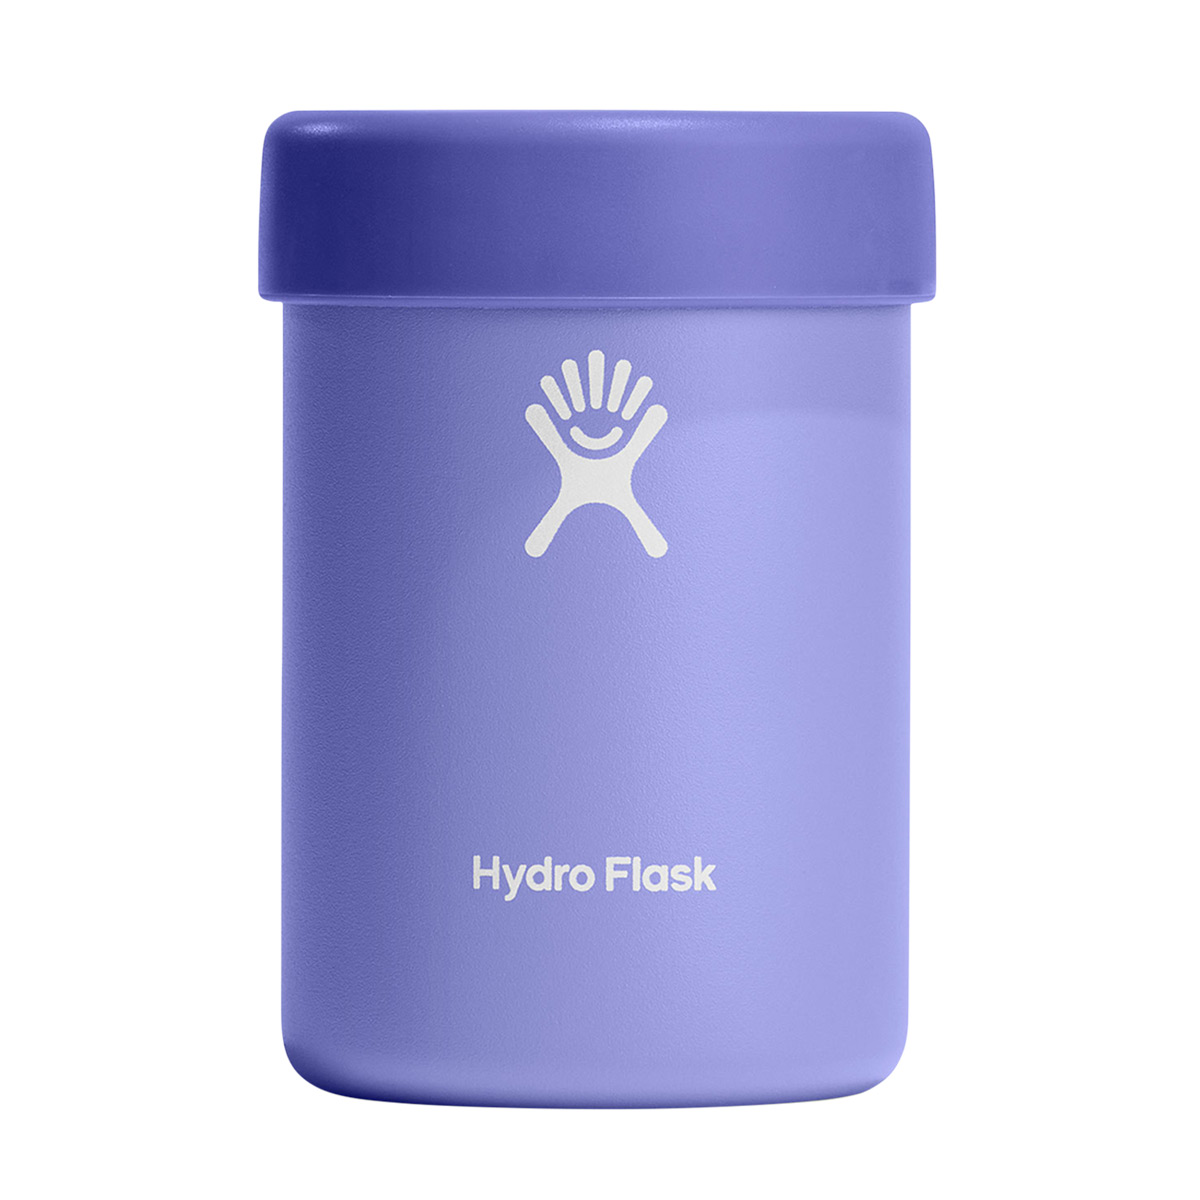 Going Hydro Flask Soft Cooler - 12L